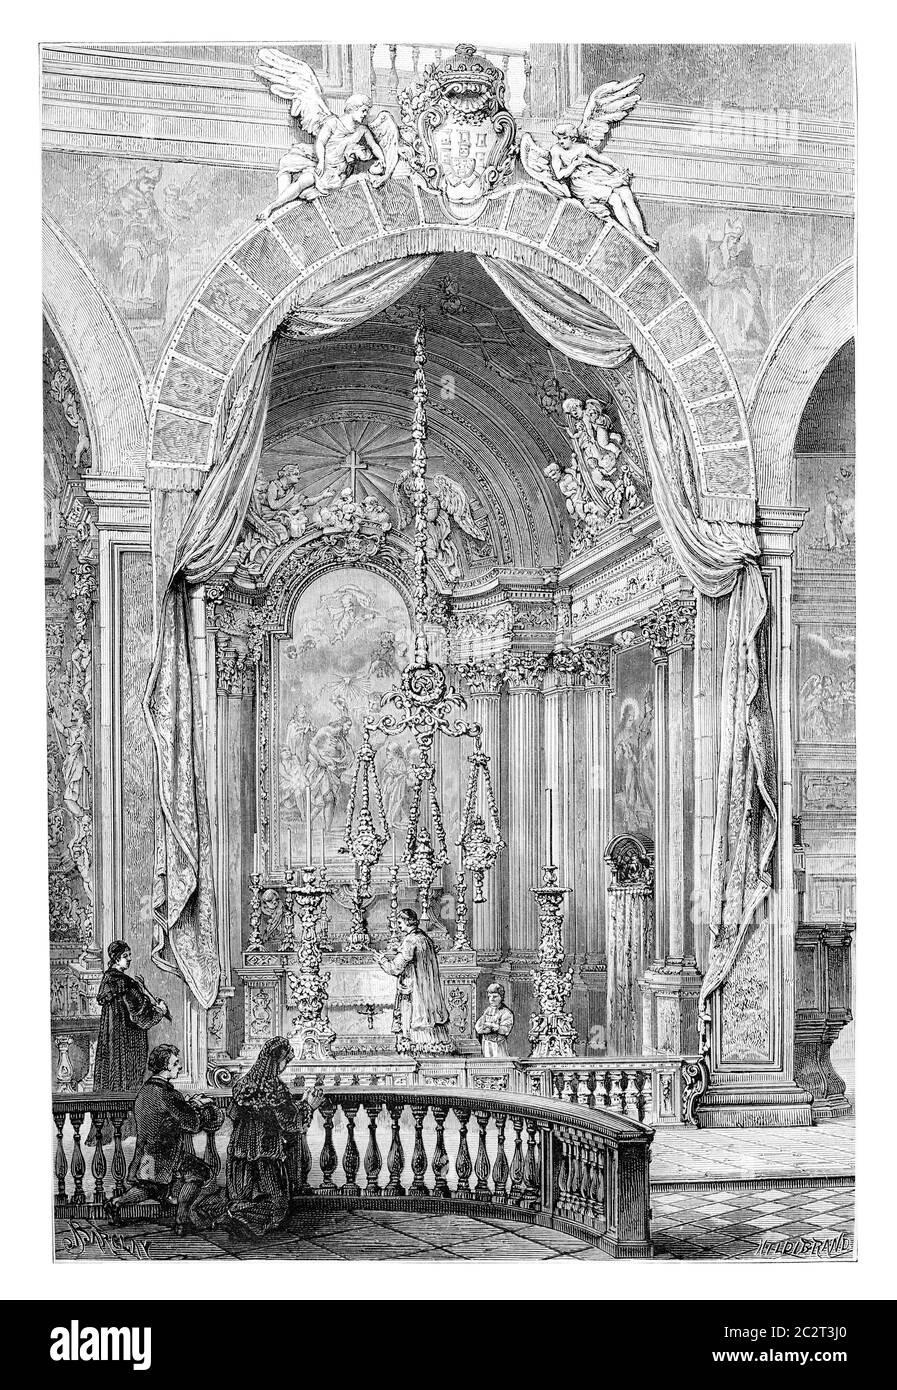 Church of Saint Roch or Igreja de Sao Roque in Lisbon, Portugal, drawing by Barclay based on a photograph, vintage engraved illustration. Le Tour du M Stock Photo